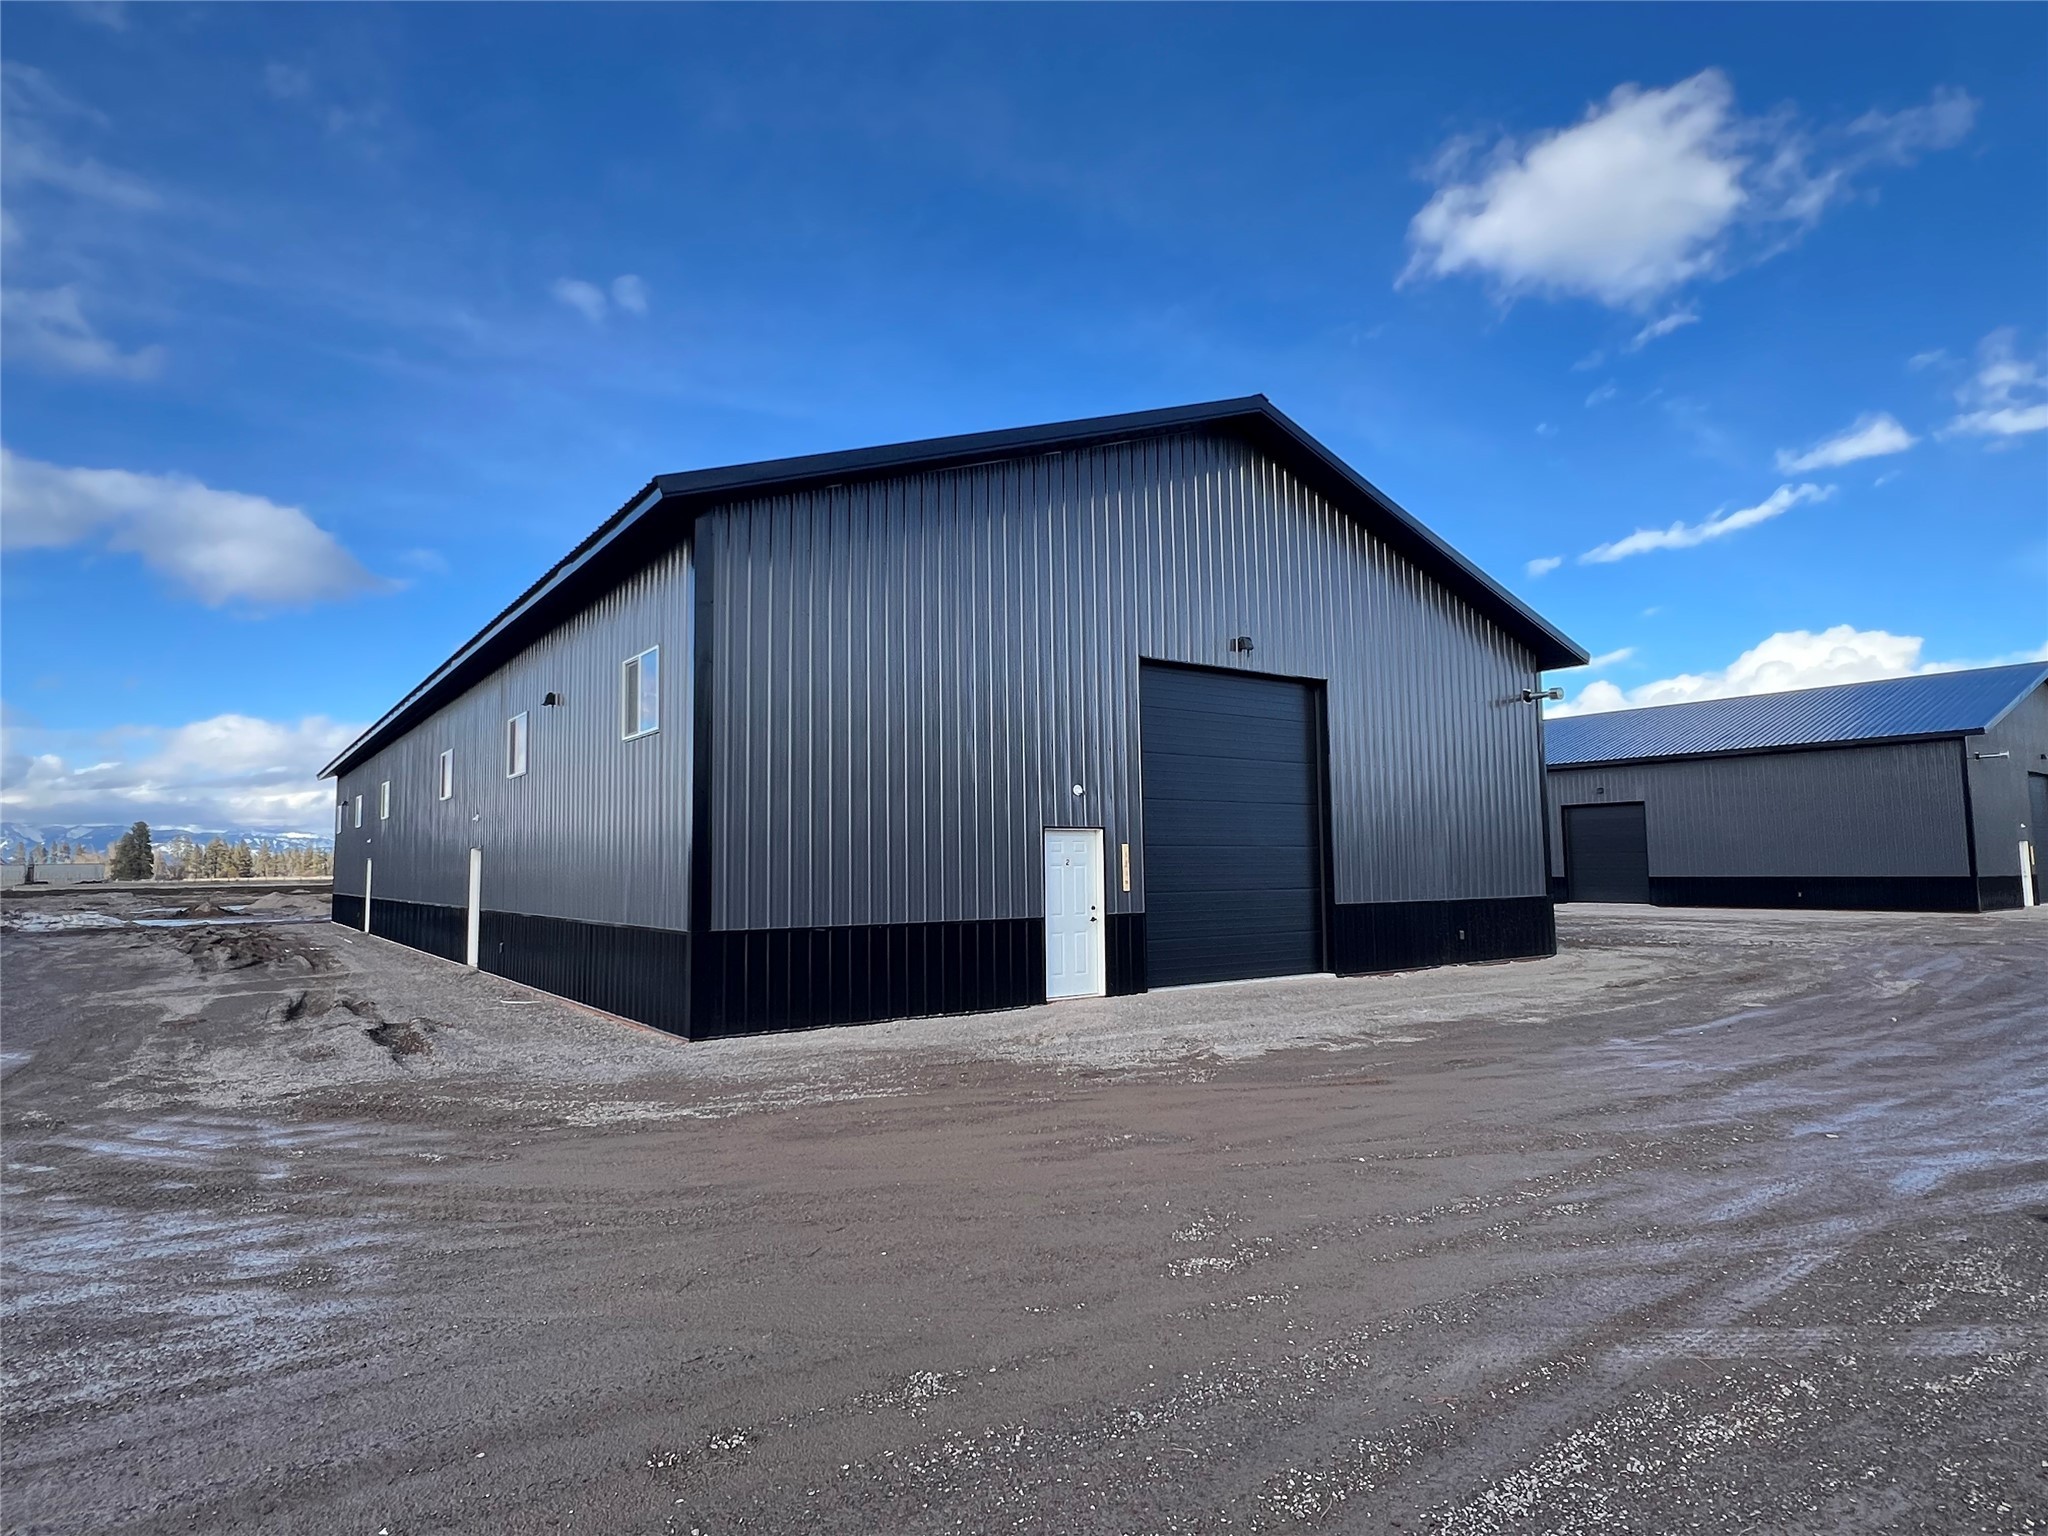 3000 Square Foot (50x60) shop/warehouse space available for lease.  This new development, with access off of Highway 2E and E Reserve, has 6000 SF buildings available as a whole or half building.  351 Unit 2 is a half building with bathroom, two man doors, and two overhead doors (12x14 and 10x12).  The building has metal walls and ceiling interior finishes, 16' walls, gas heater, evergreen water, private sewer, and 200 Amp service.  The development is paved, and set up for tractor trailer circulation and deliveries.  Call Zac Andrews at 406-250-6160, or your Real Estate Professional.